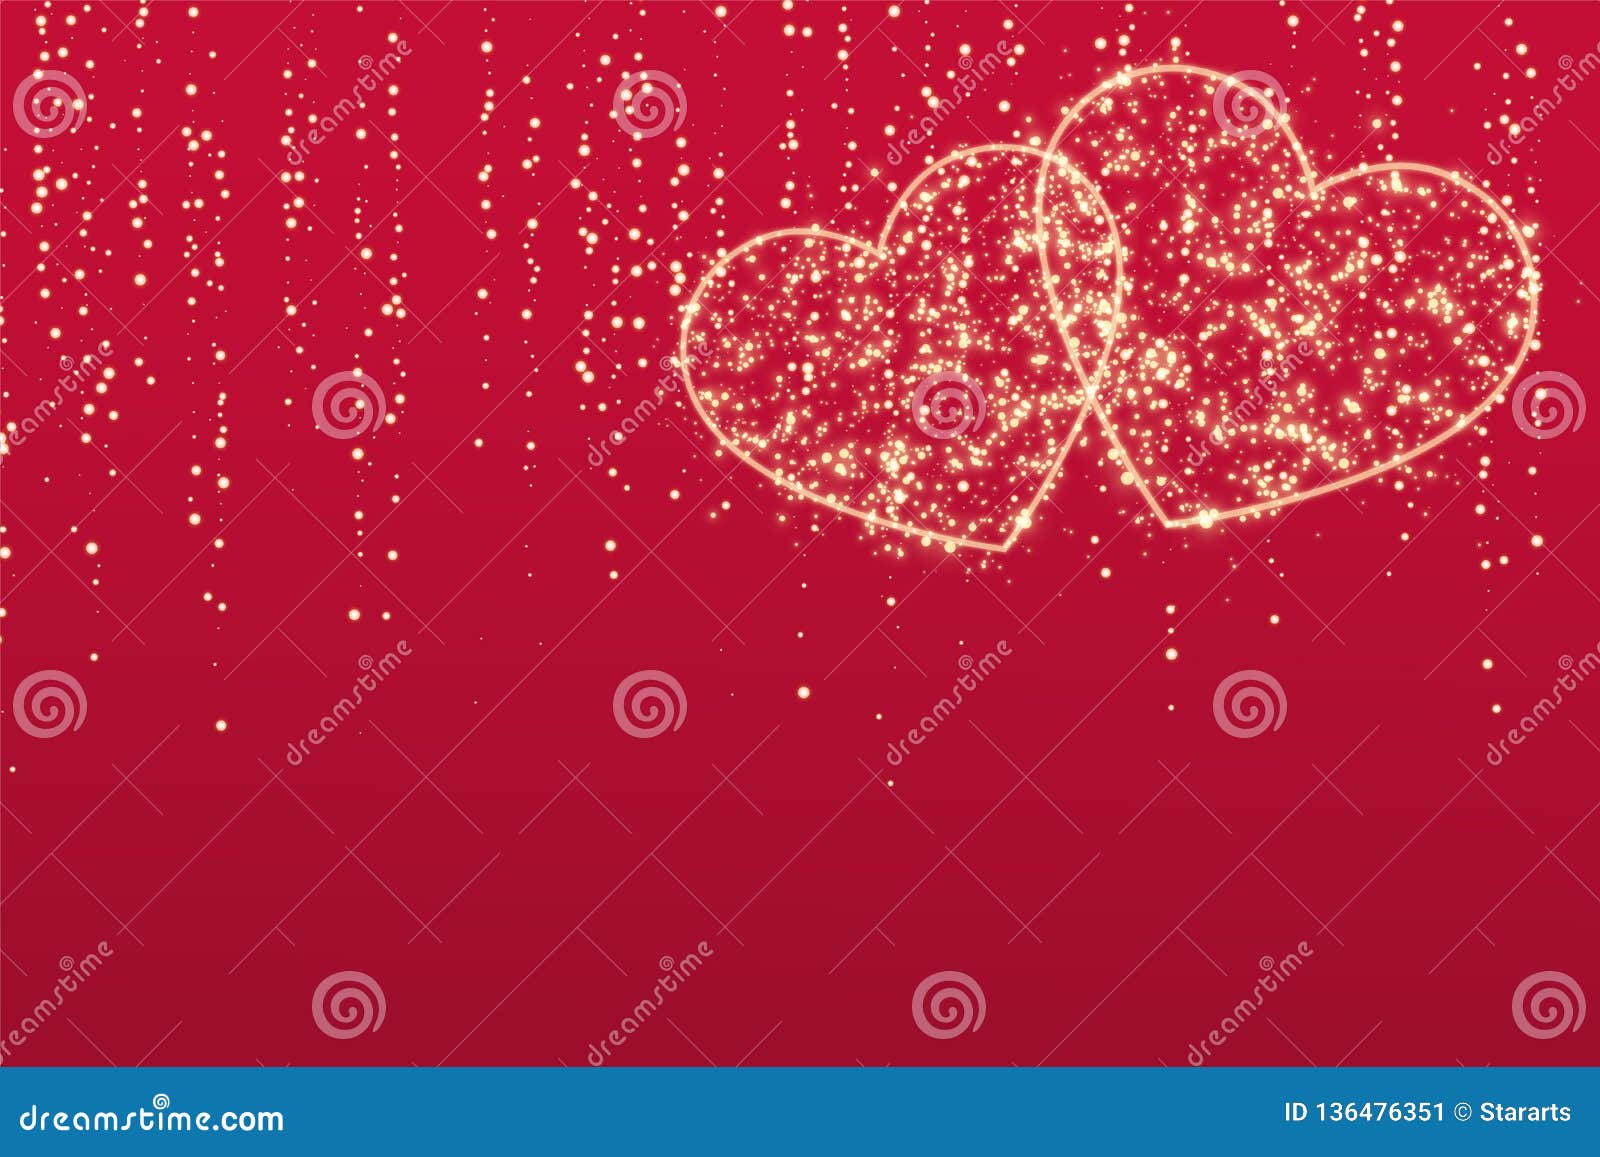 Abstract Pink And Gold Hearts With Glitters Background Abstract Pink Hearts  Background Image And Wallpaper for Free Download